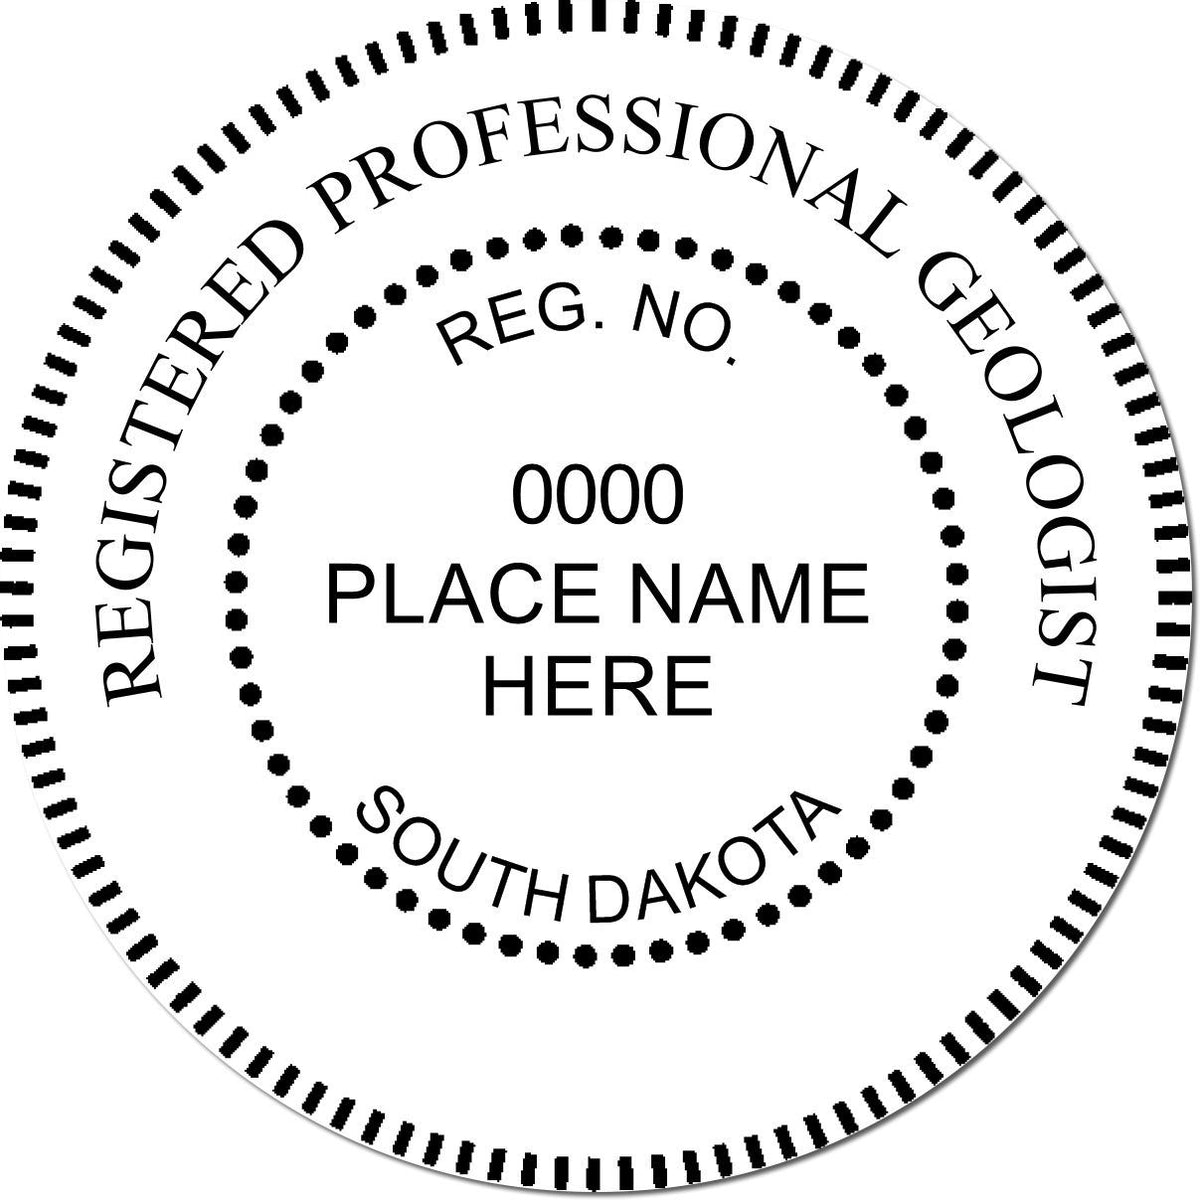 This paper is stamped with a sample imprint of the South Dakota Professional Geologist Seal Stamp, signifying its quality and reliability.